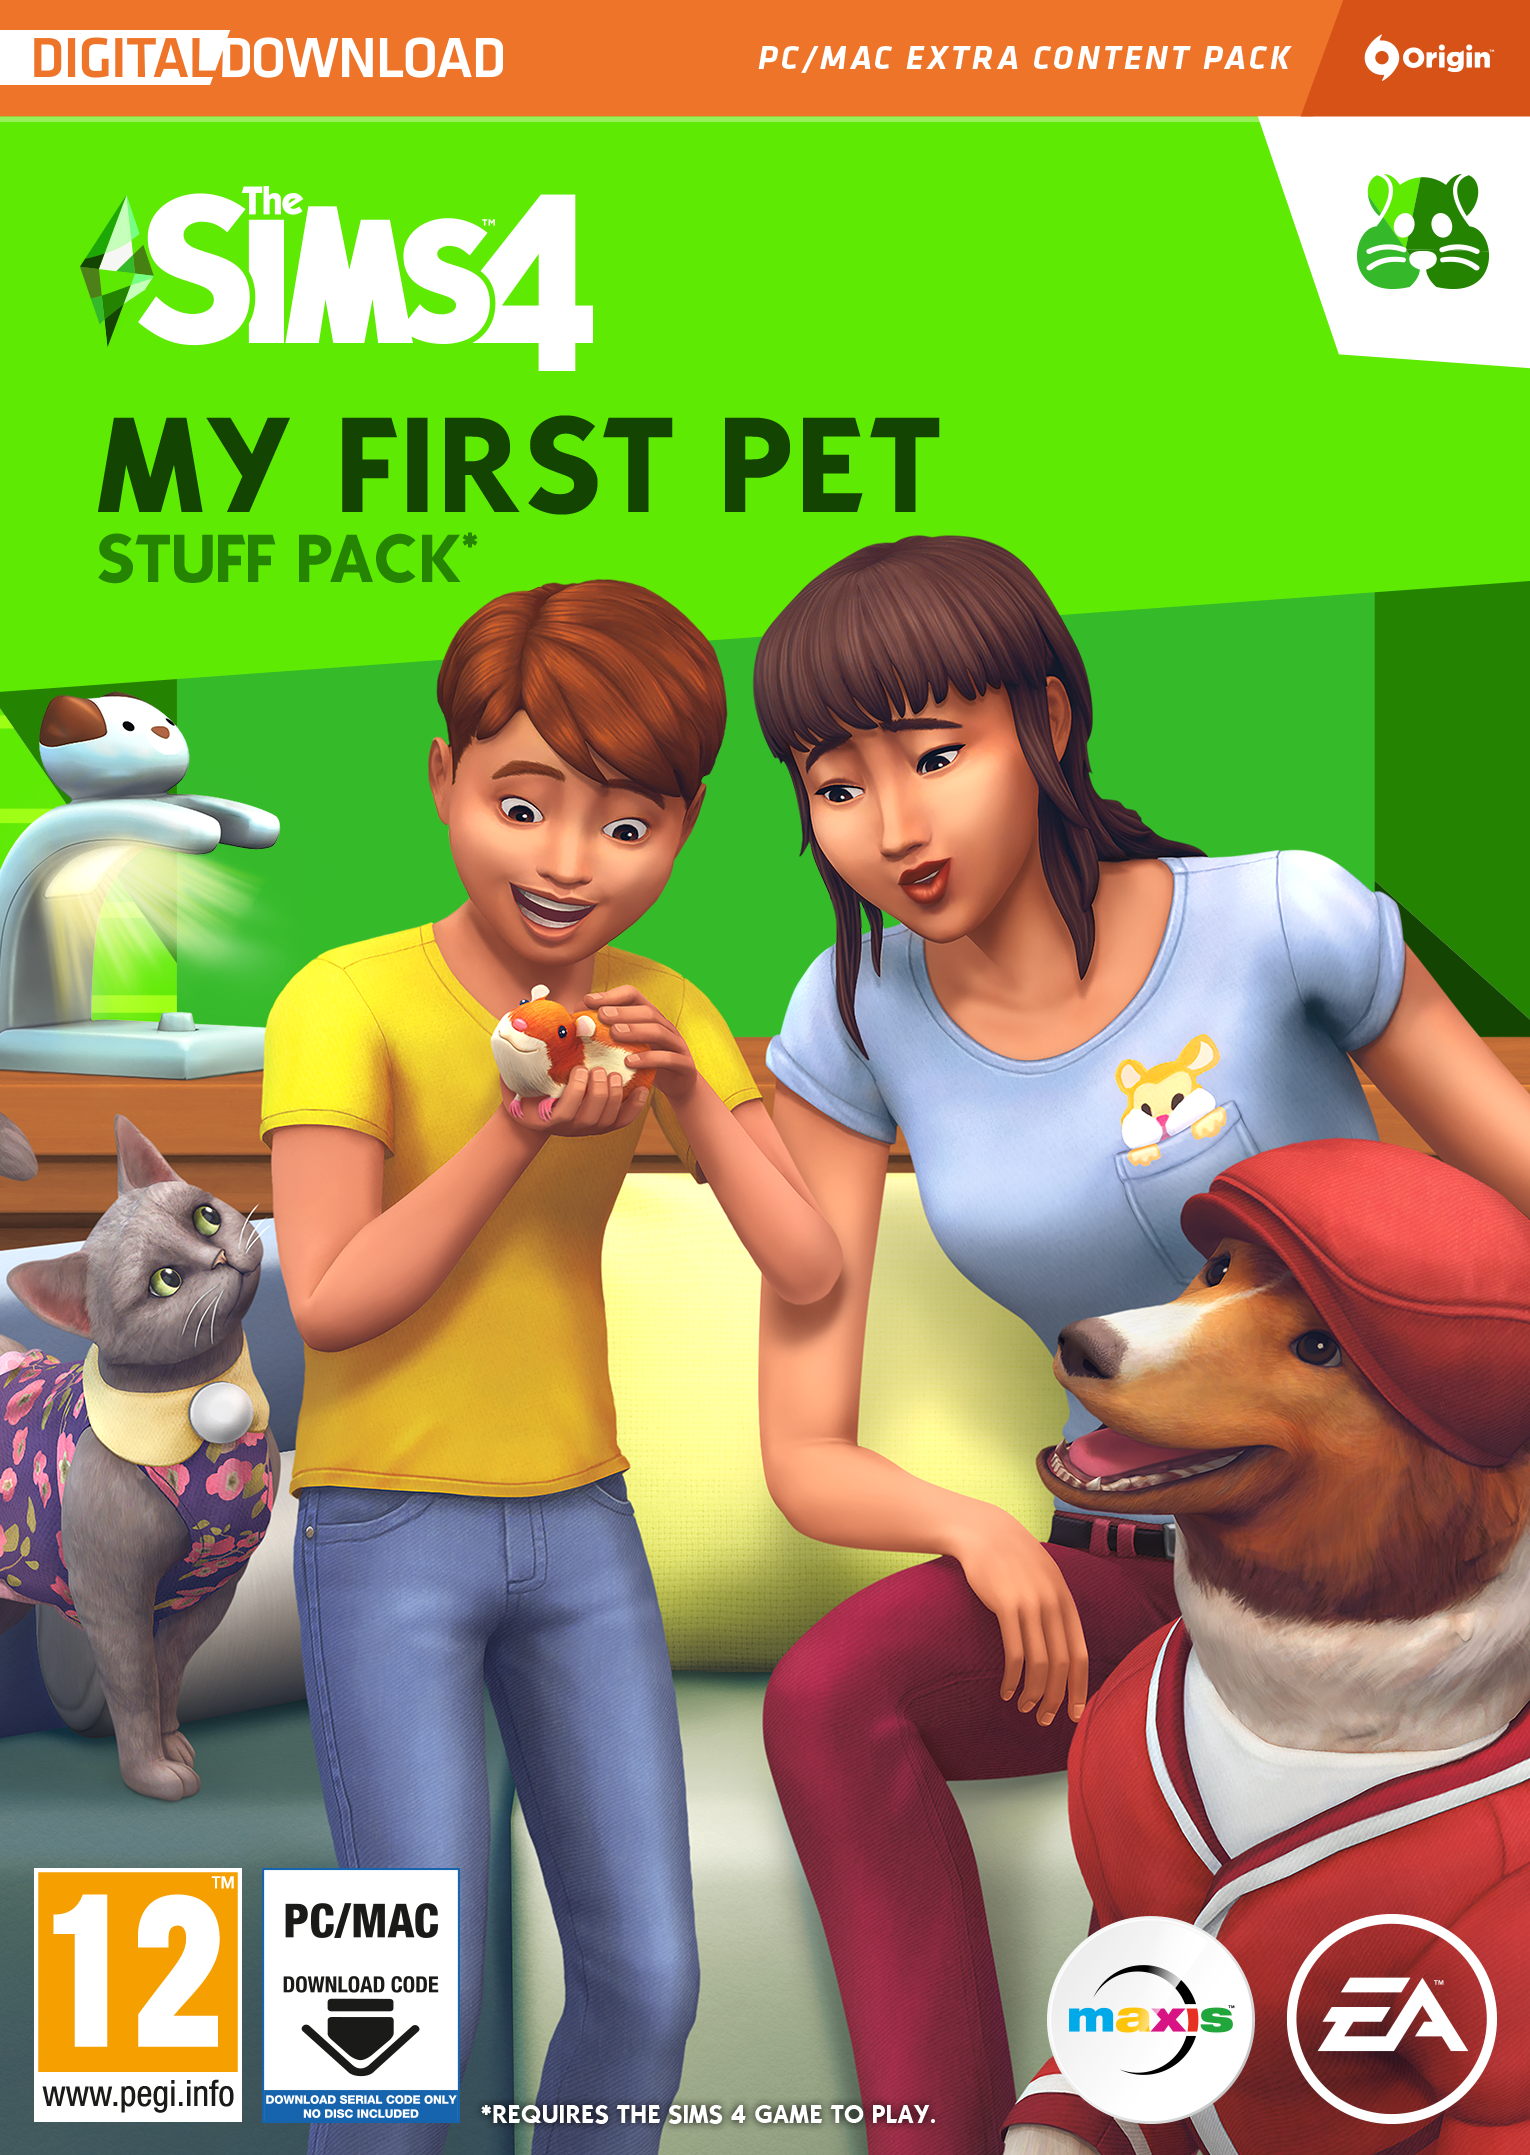 THE SIMS 4 (SP14) MY FIRST PET STUFF